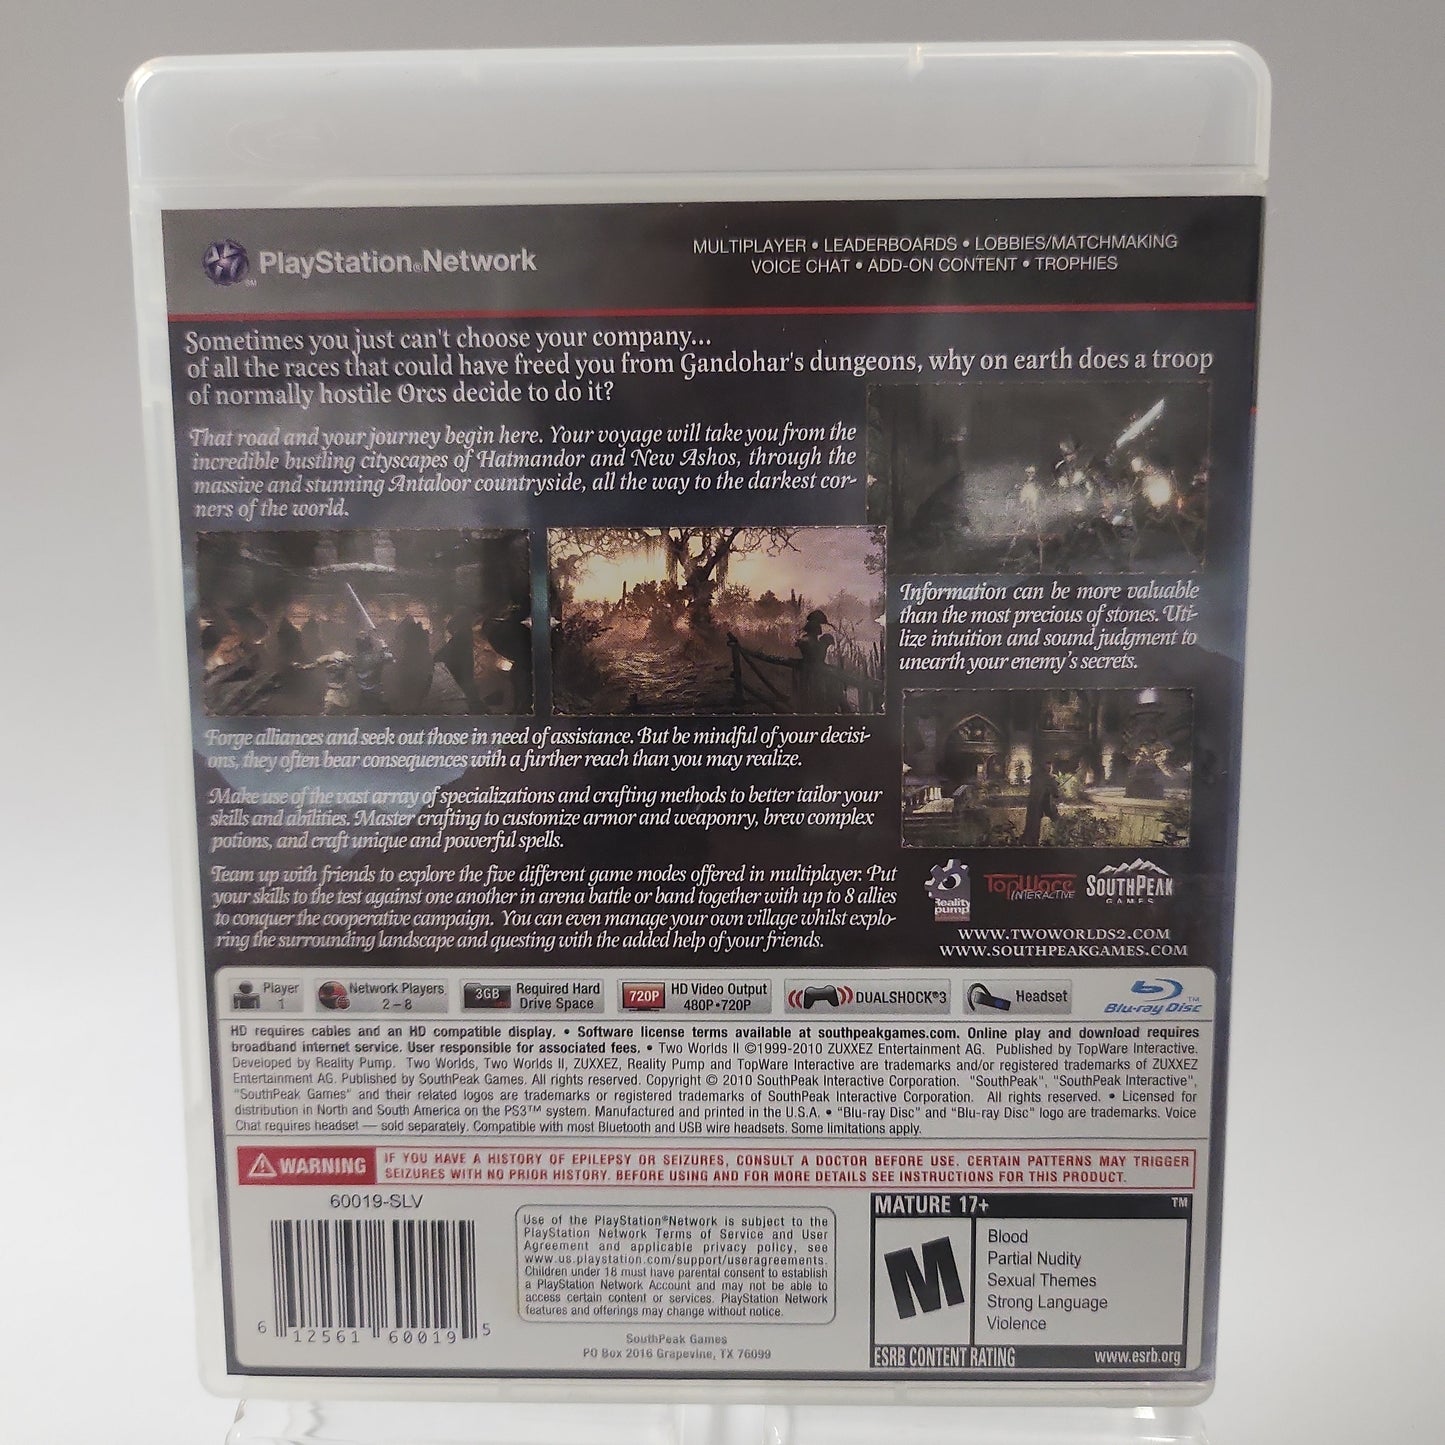 Two Worlds II American Cover Playstation 3